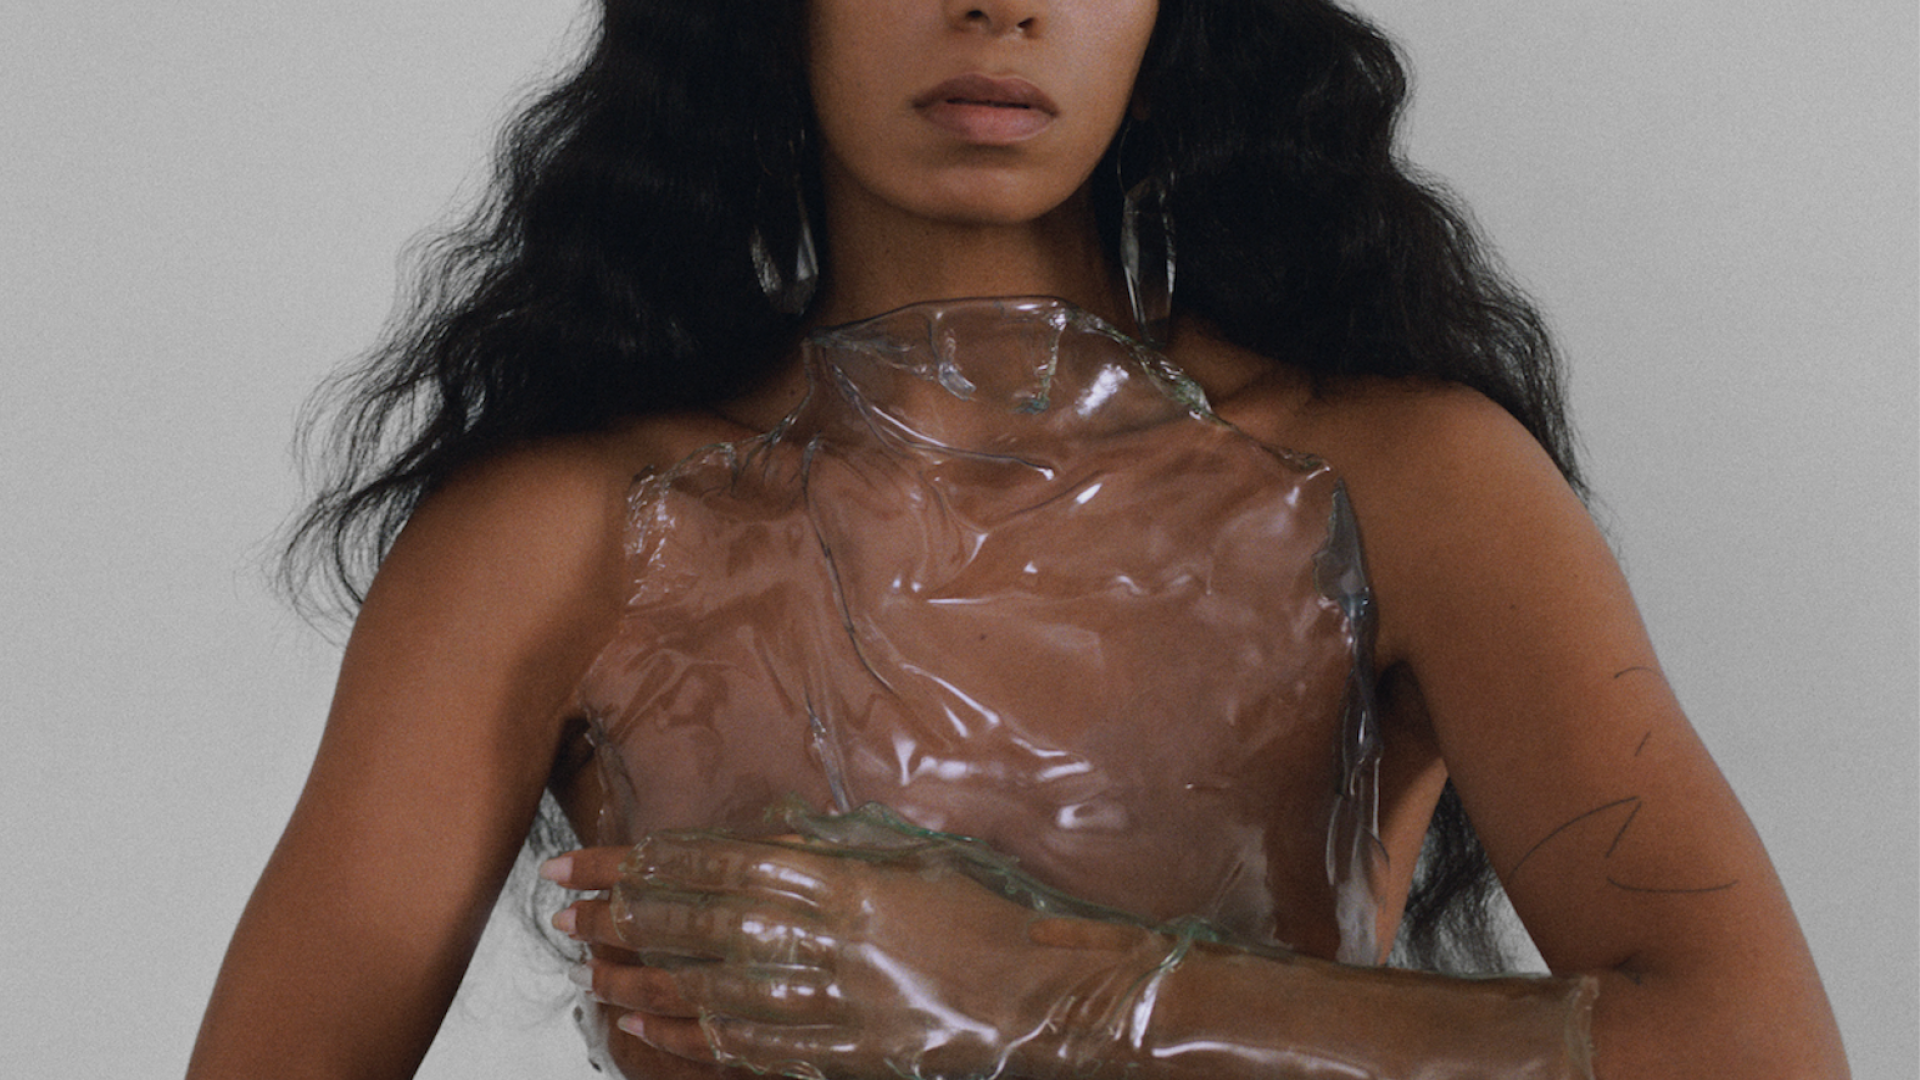 What We're Listening To: Solange's New Album, 'When I Get Home,' Is Exactly What We Needed